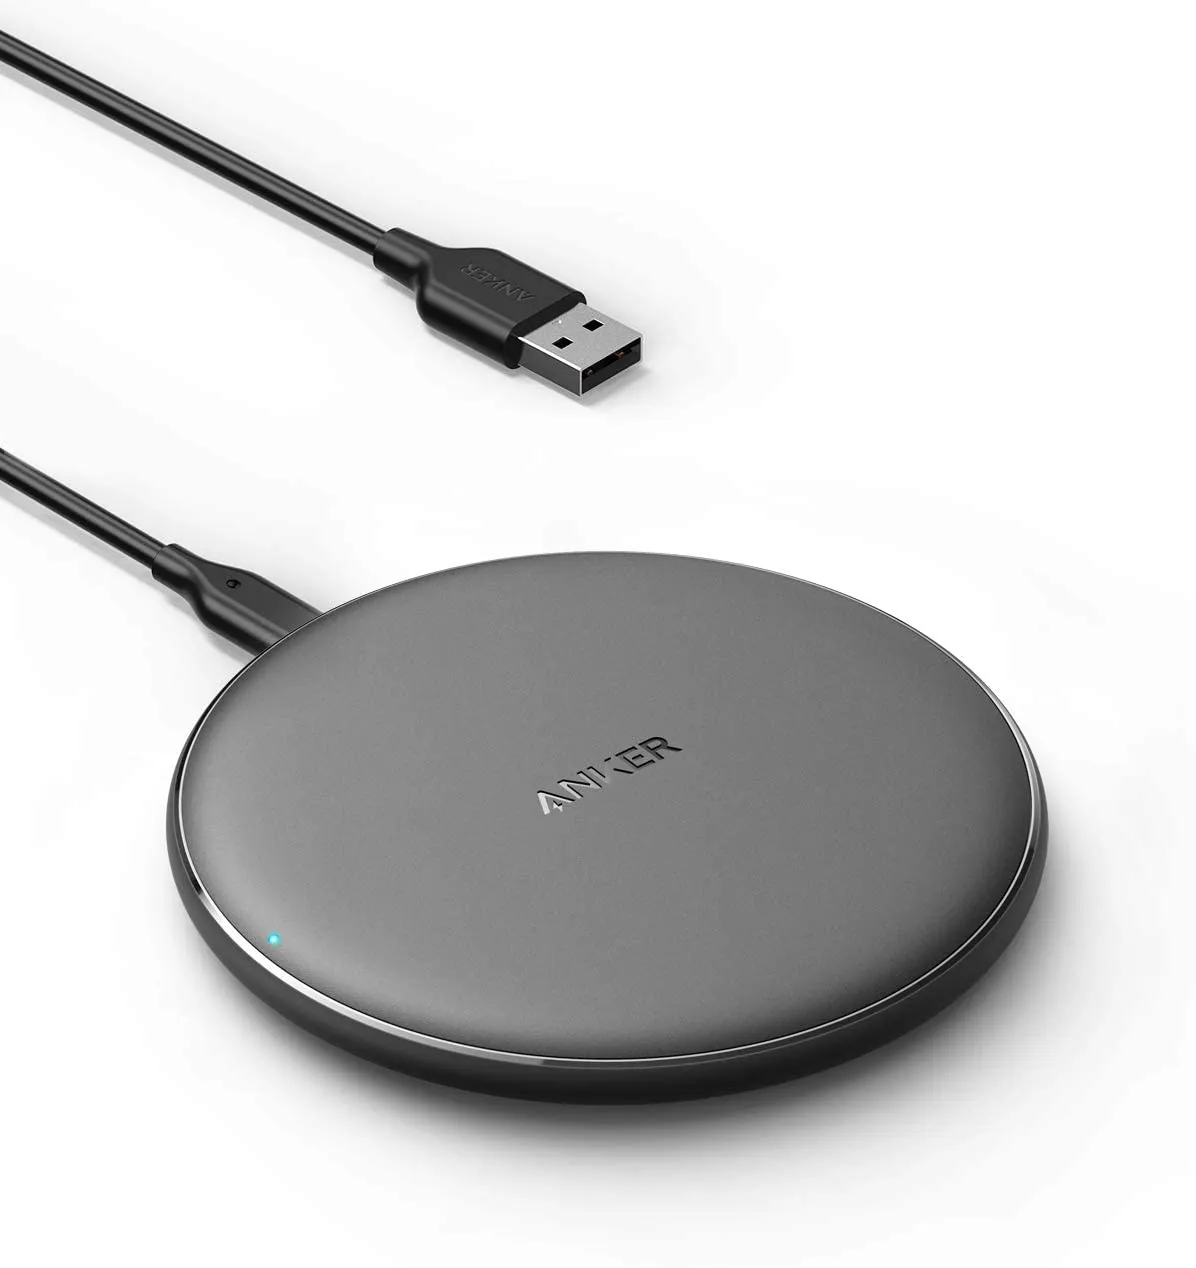 Black Anker Wireless Charger